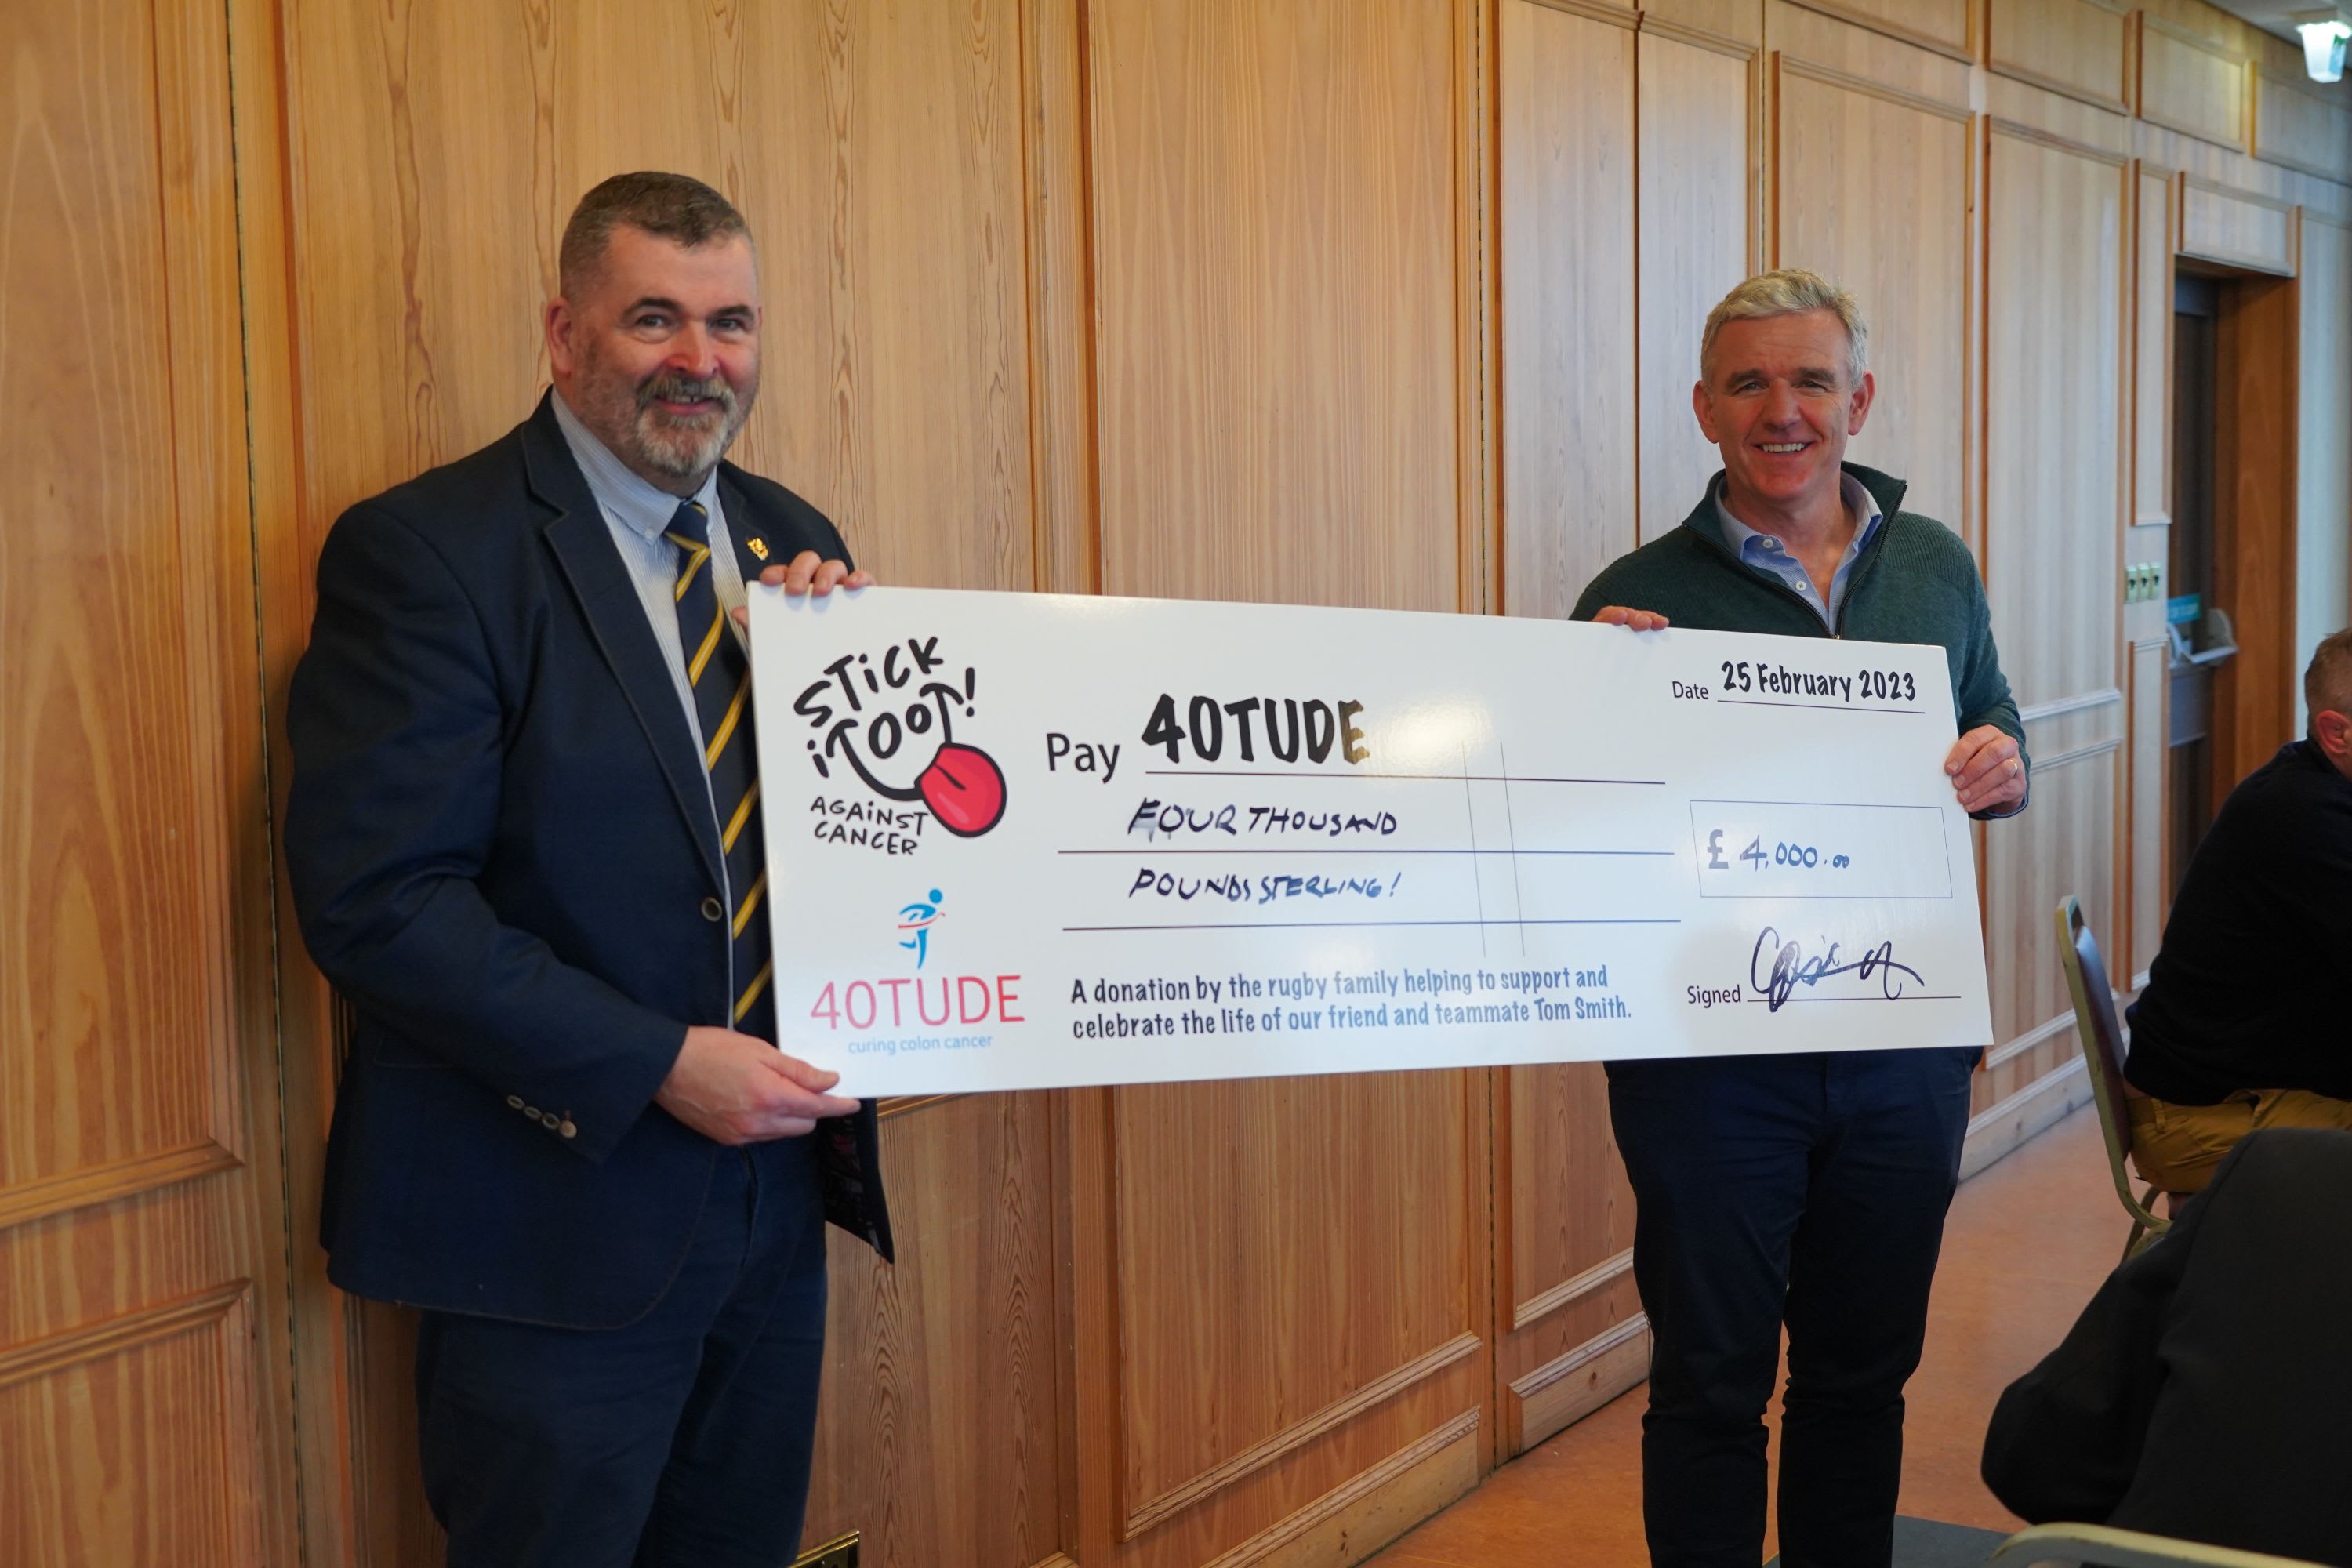 Pictured: Billy Gartley, VP of Dundee Rugby Club presents a cheque to 40tude team member Gordon Peterson